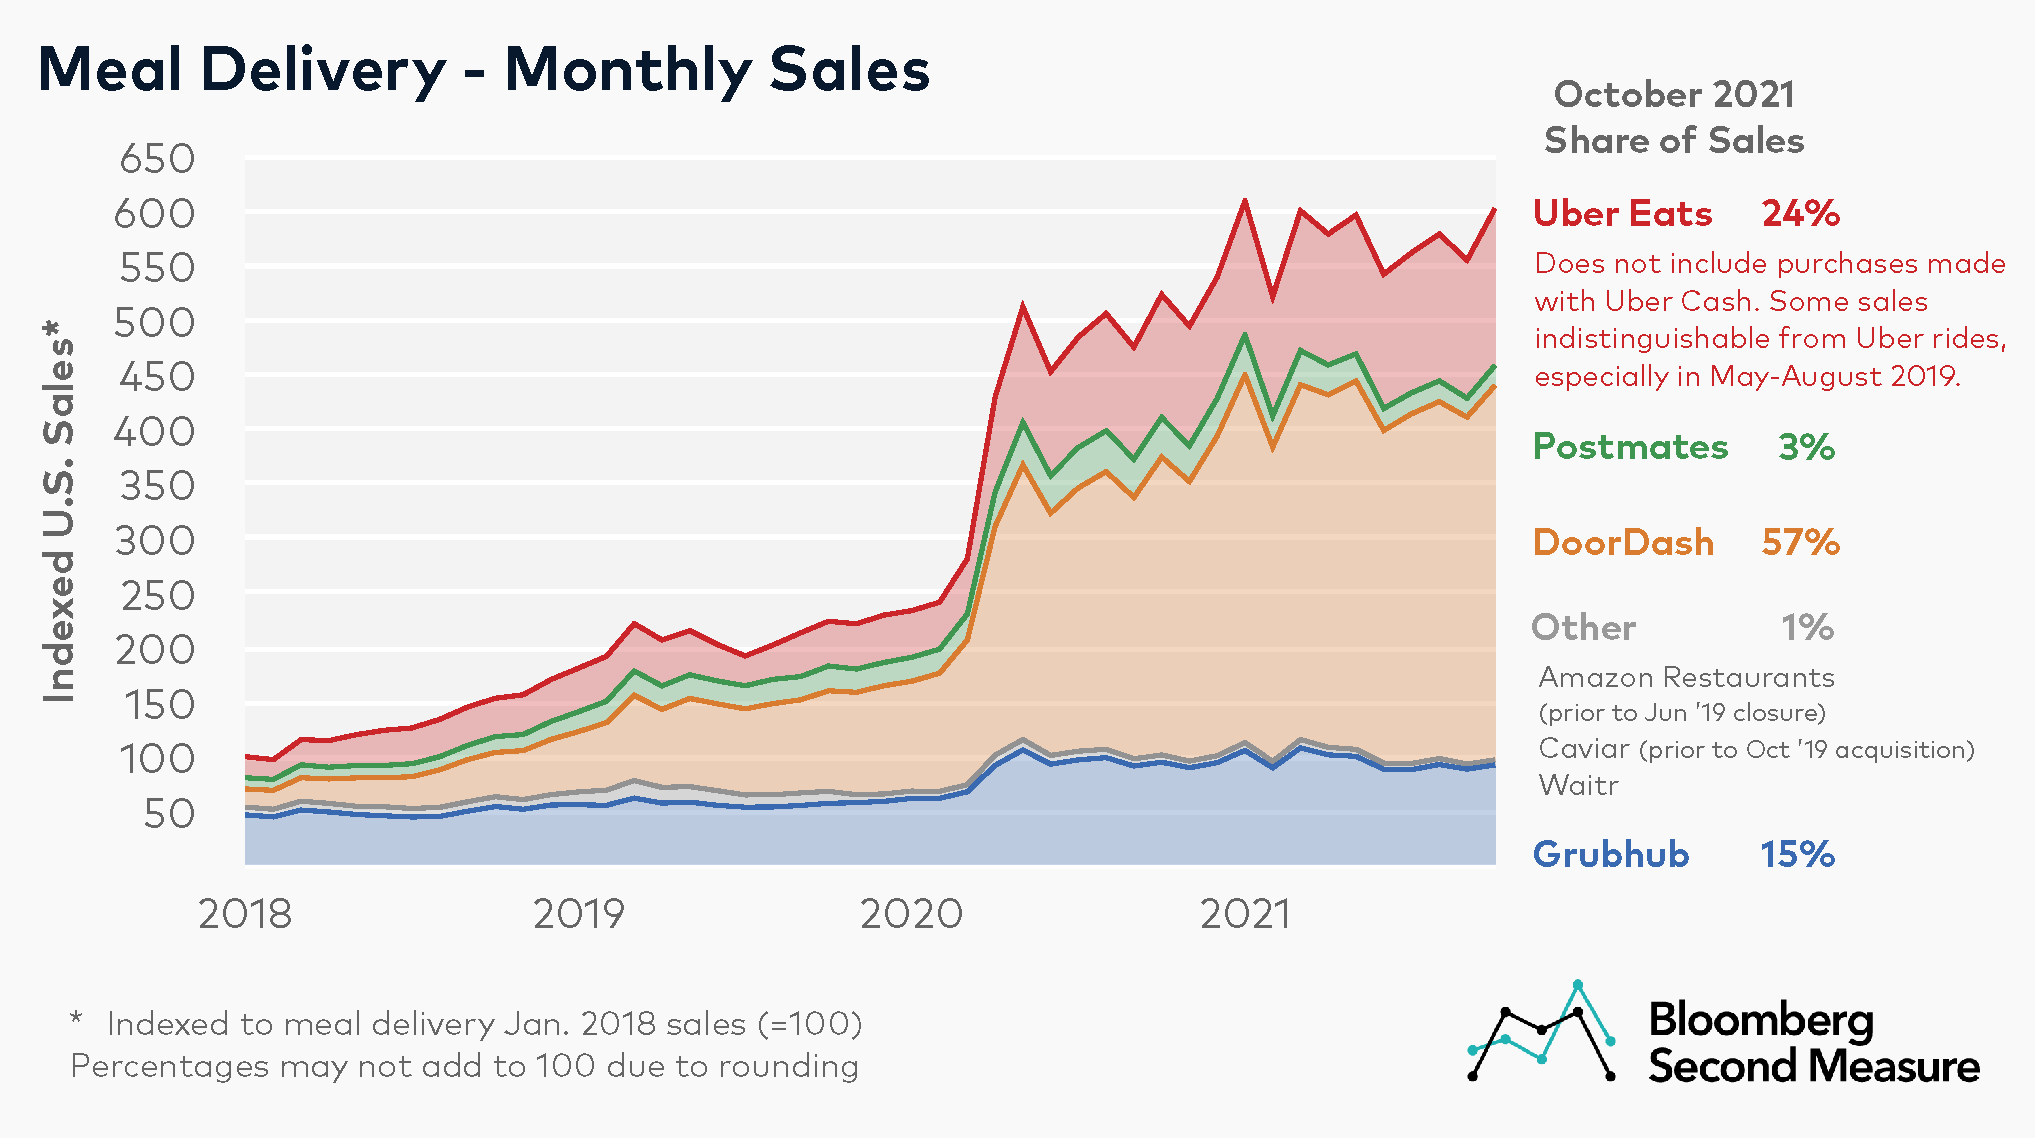 1 Meal Delivery Services Sales and Market Share for Doordash Grubhub Uber Eats Postmates and Waitr Oct 2021